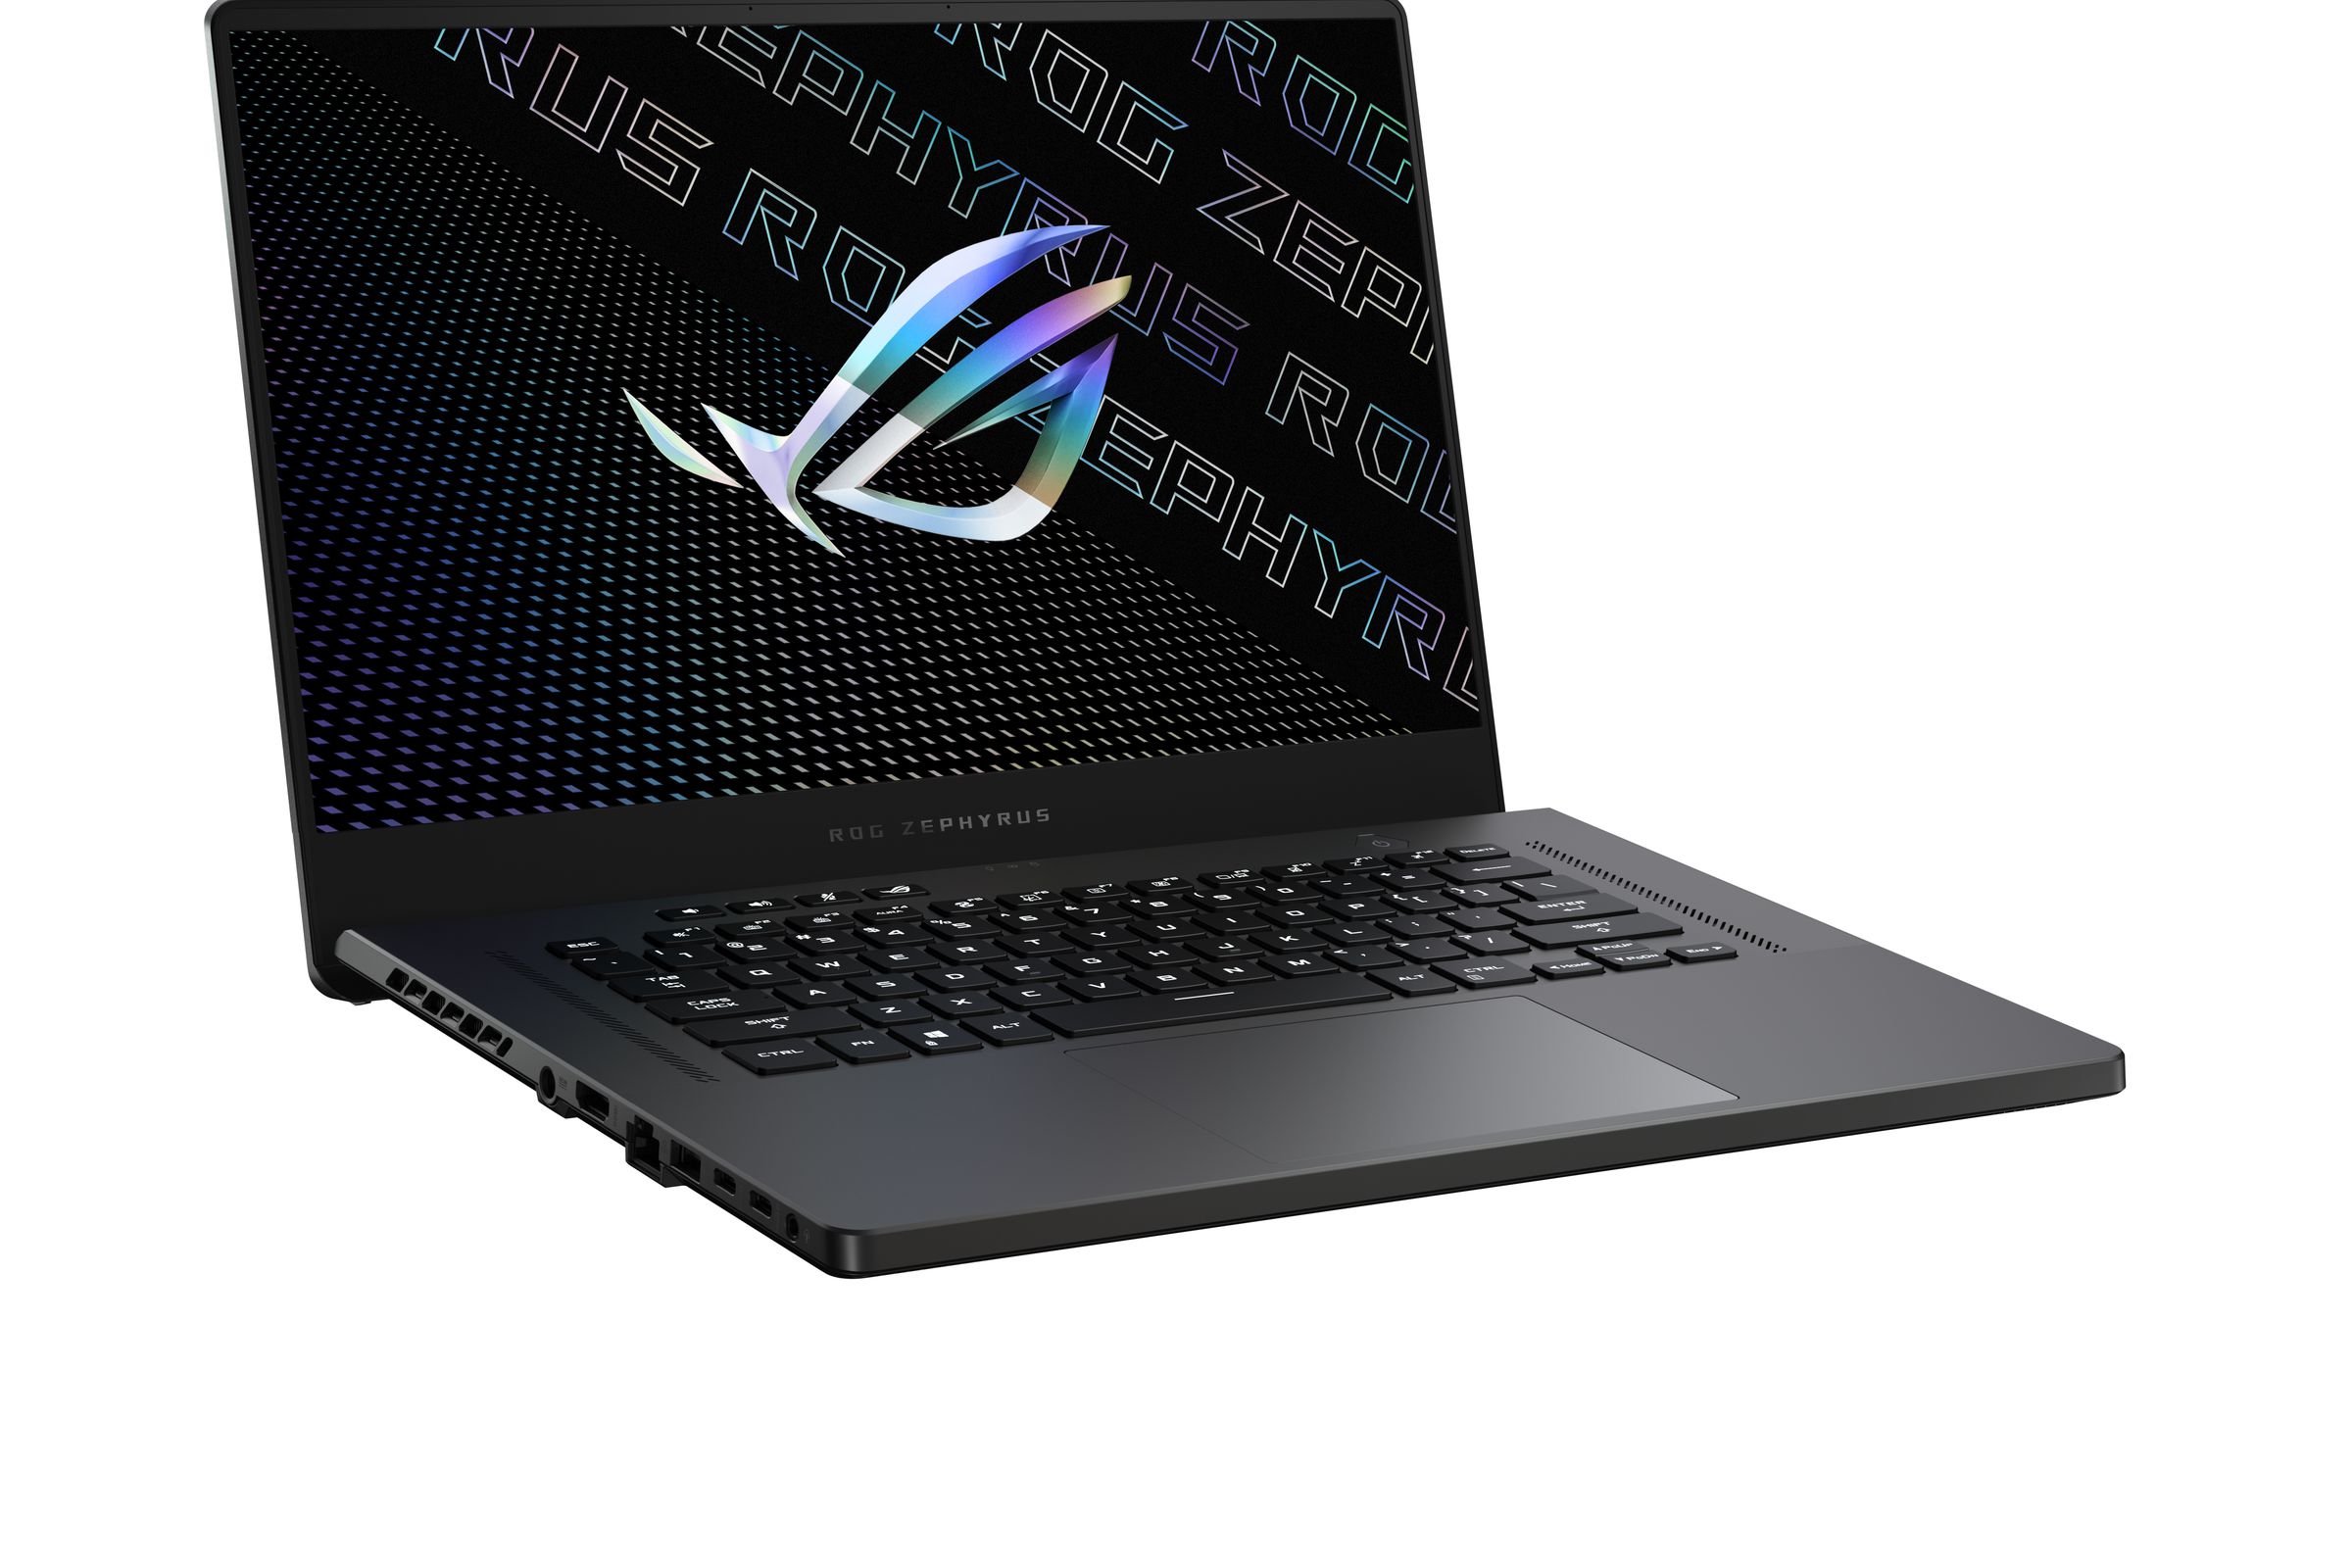 The Zephyrus G15 in Eclipse Gray open, angled to the right. The screen displays the ROG logo.